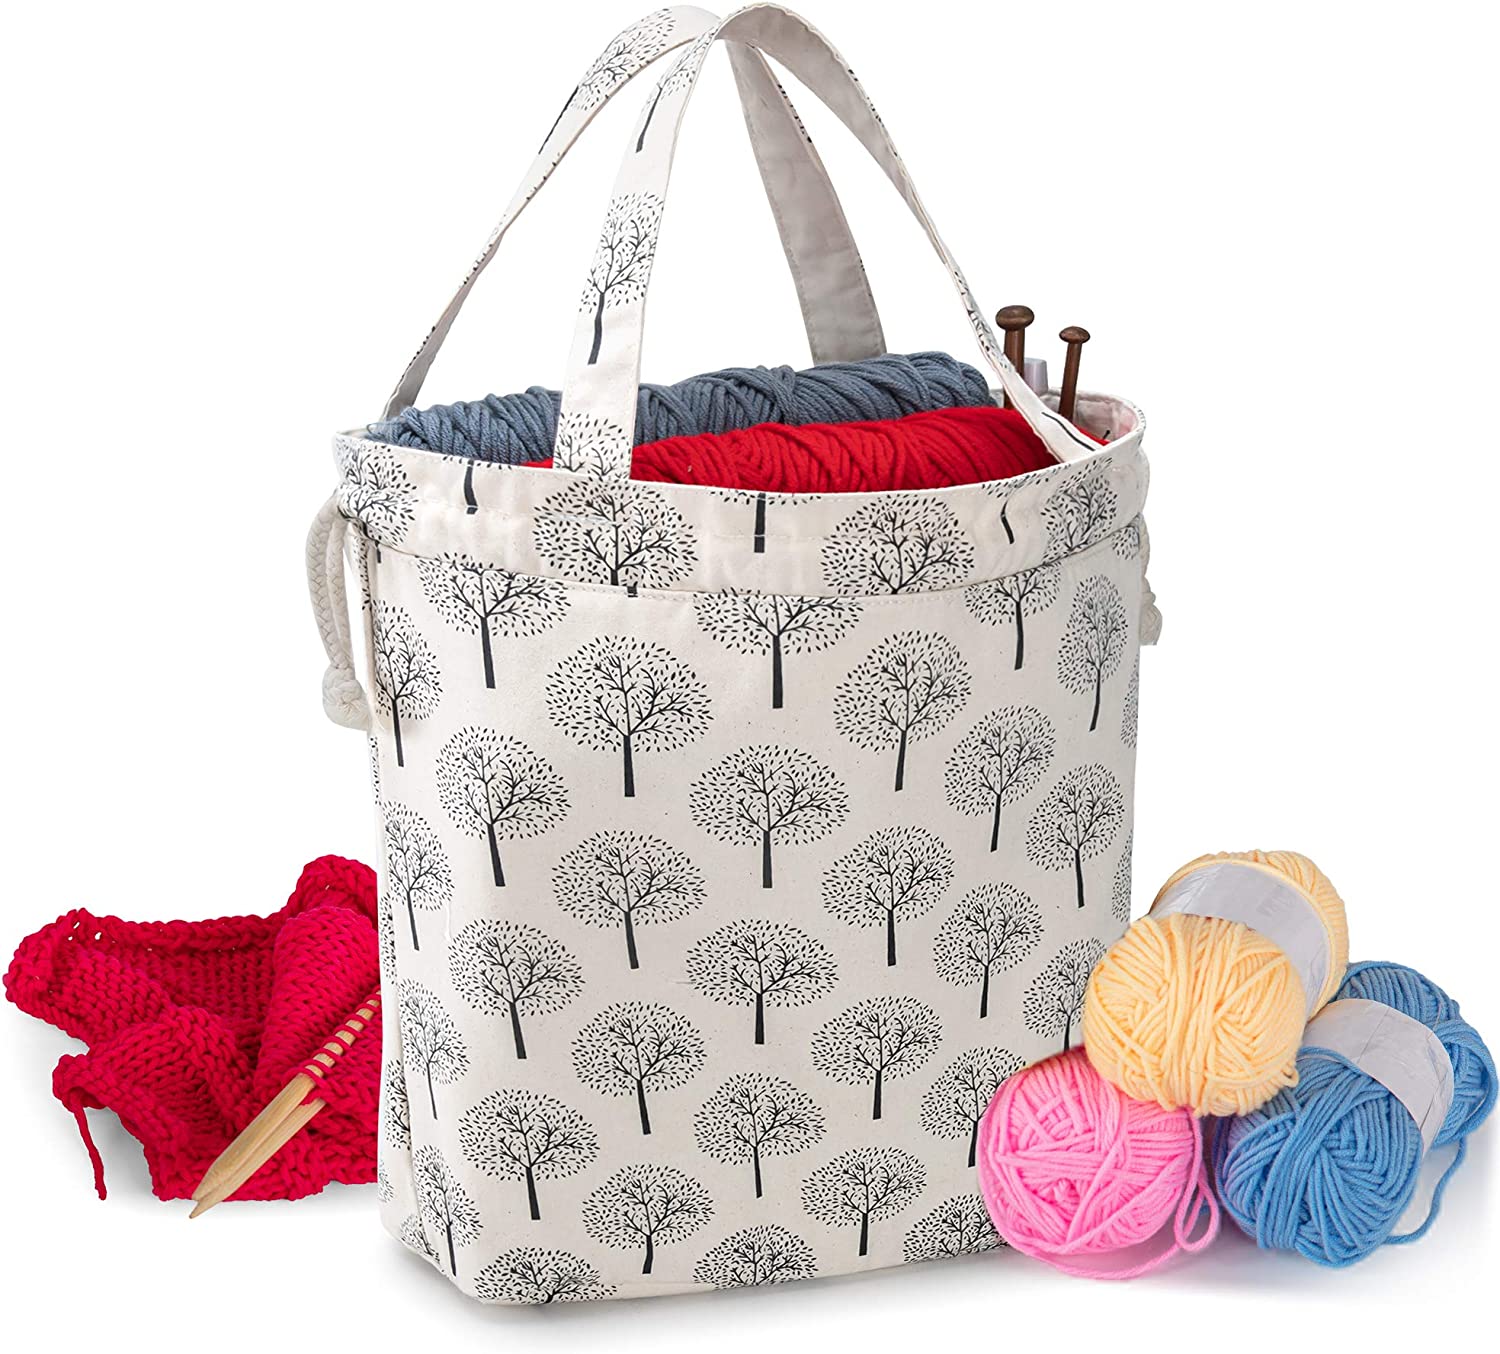 SumDirect Knitting Bag, Yarn Organizer Tote Bag Portable Storage Bag for  Yarns, Carrying Projects, Knitting Needles, Crochet Hooks, Manuals and  Other